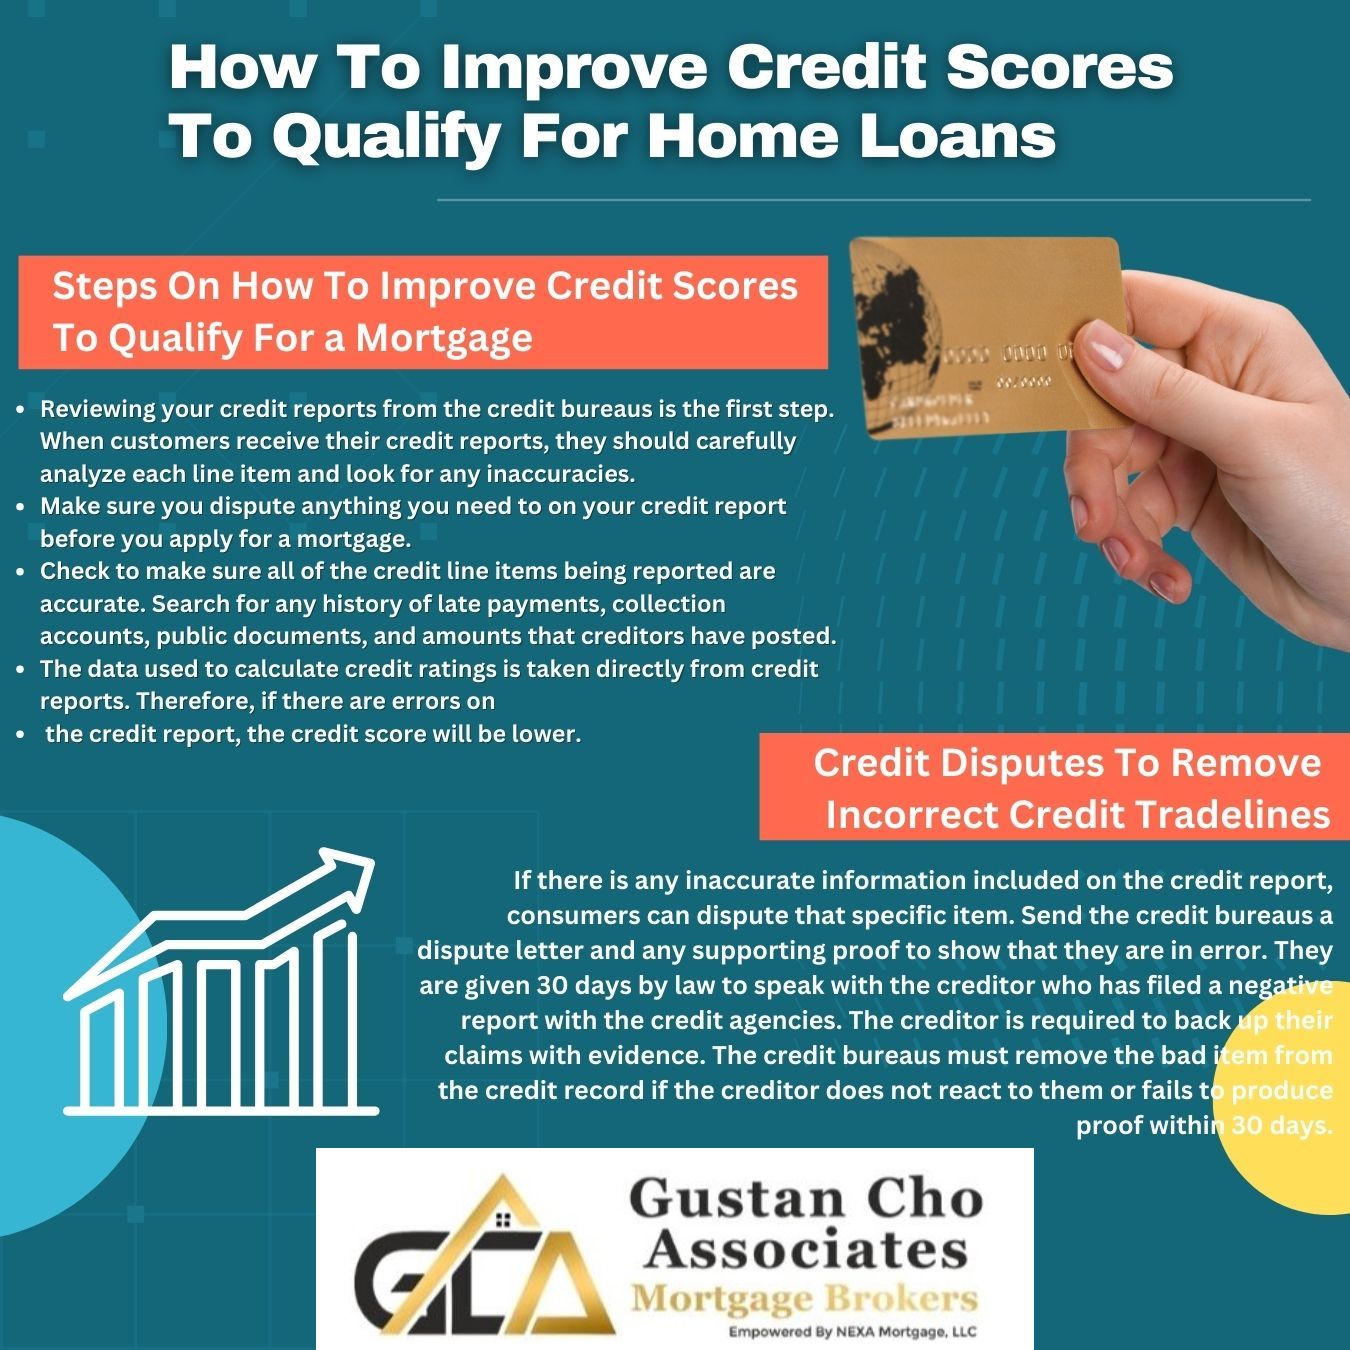 Late Payments and Impact on Credit Scores